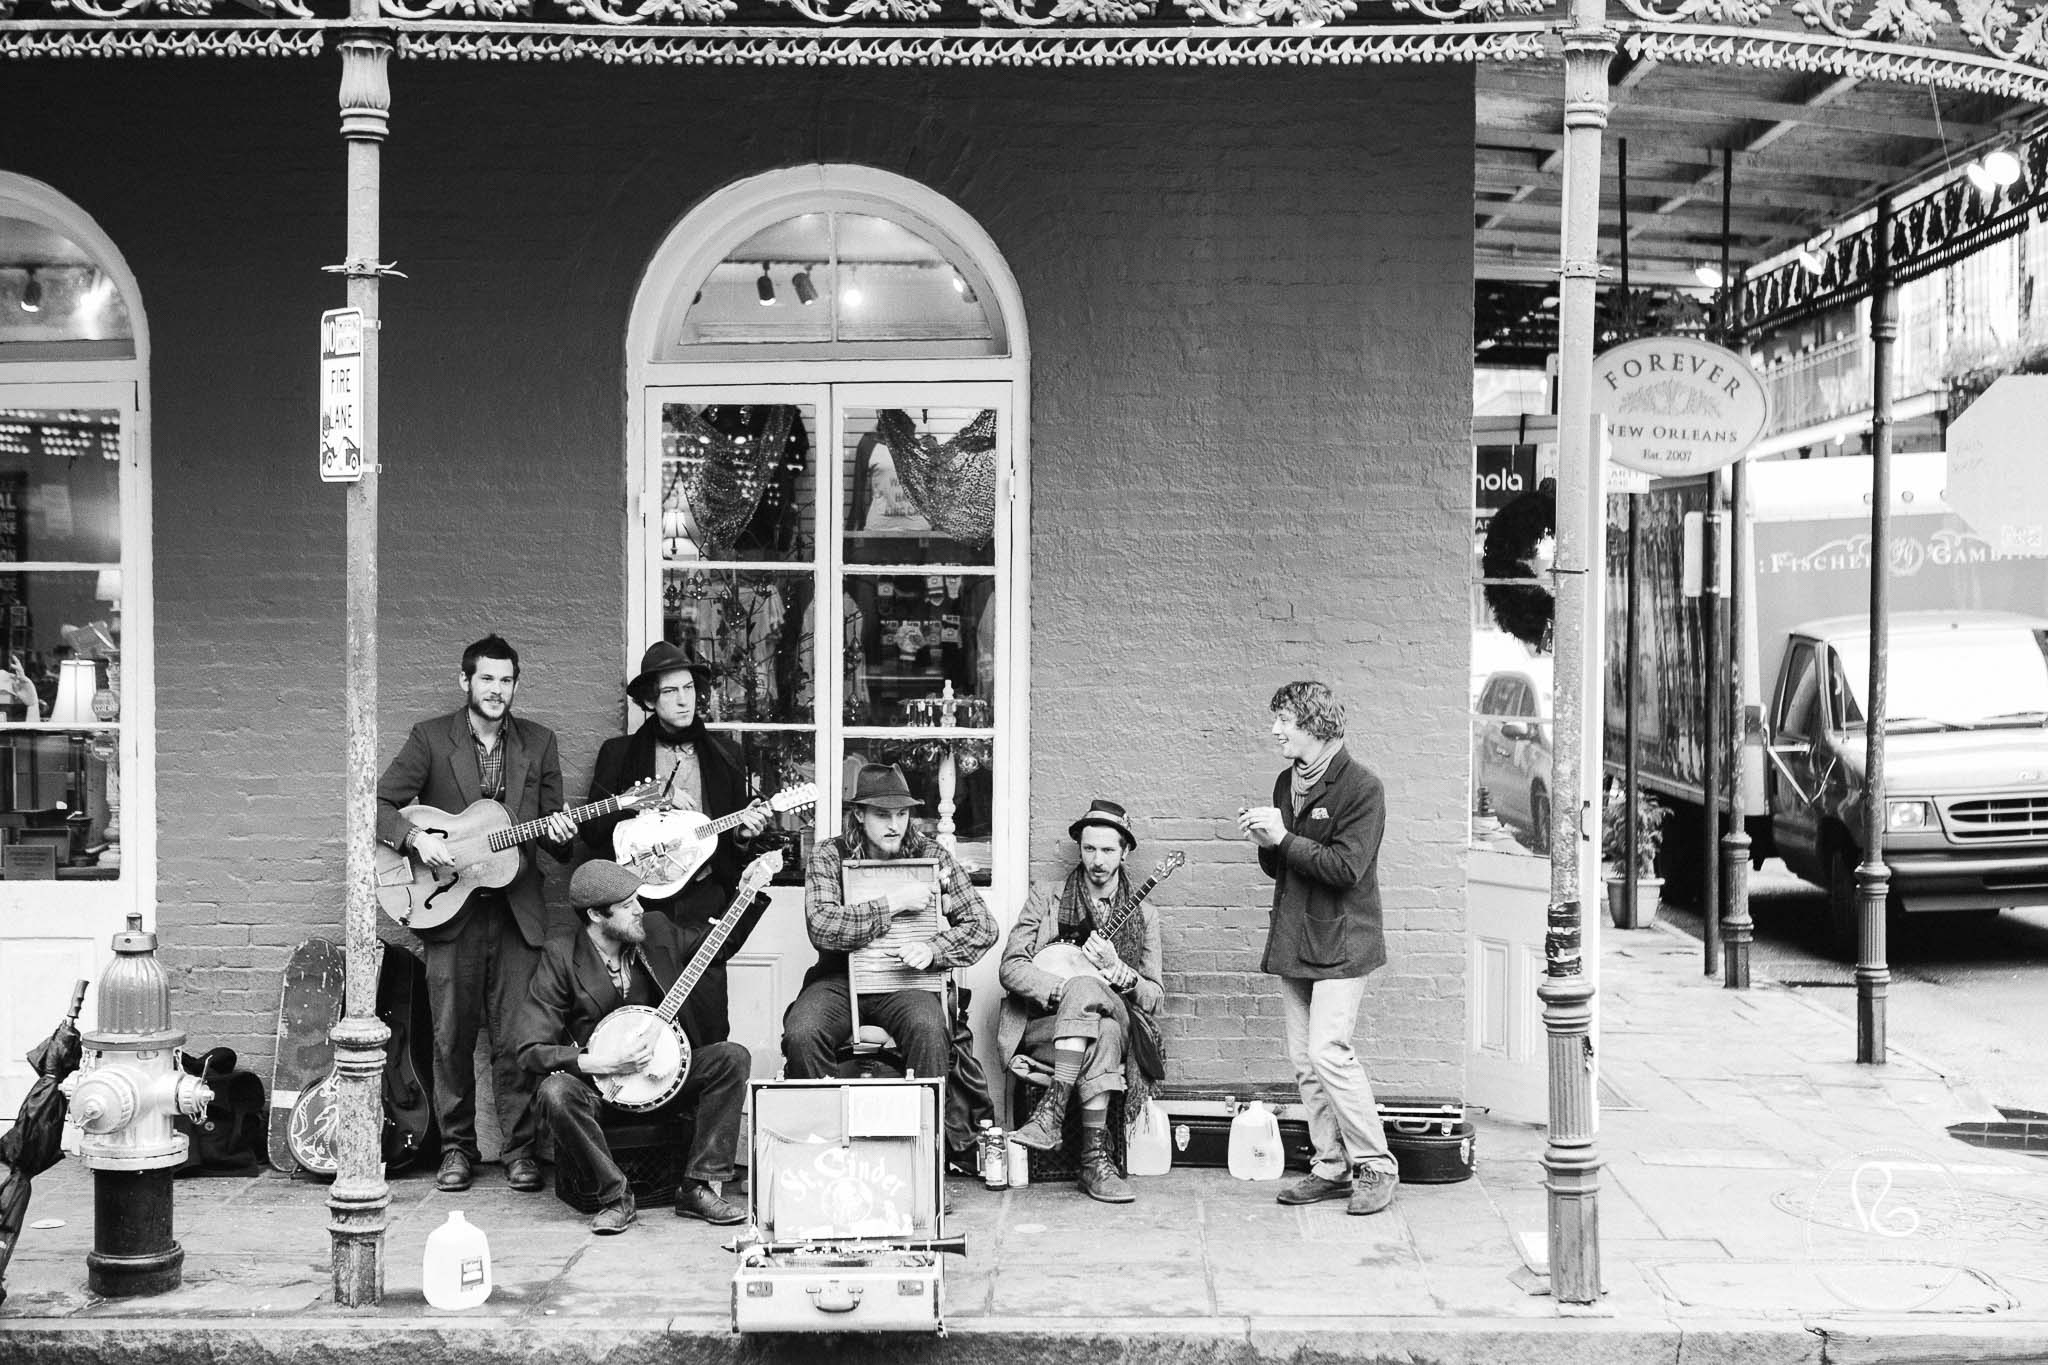 Music is always in the air in the French Quarter.